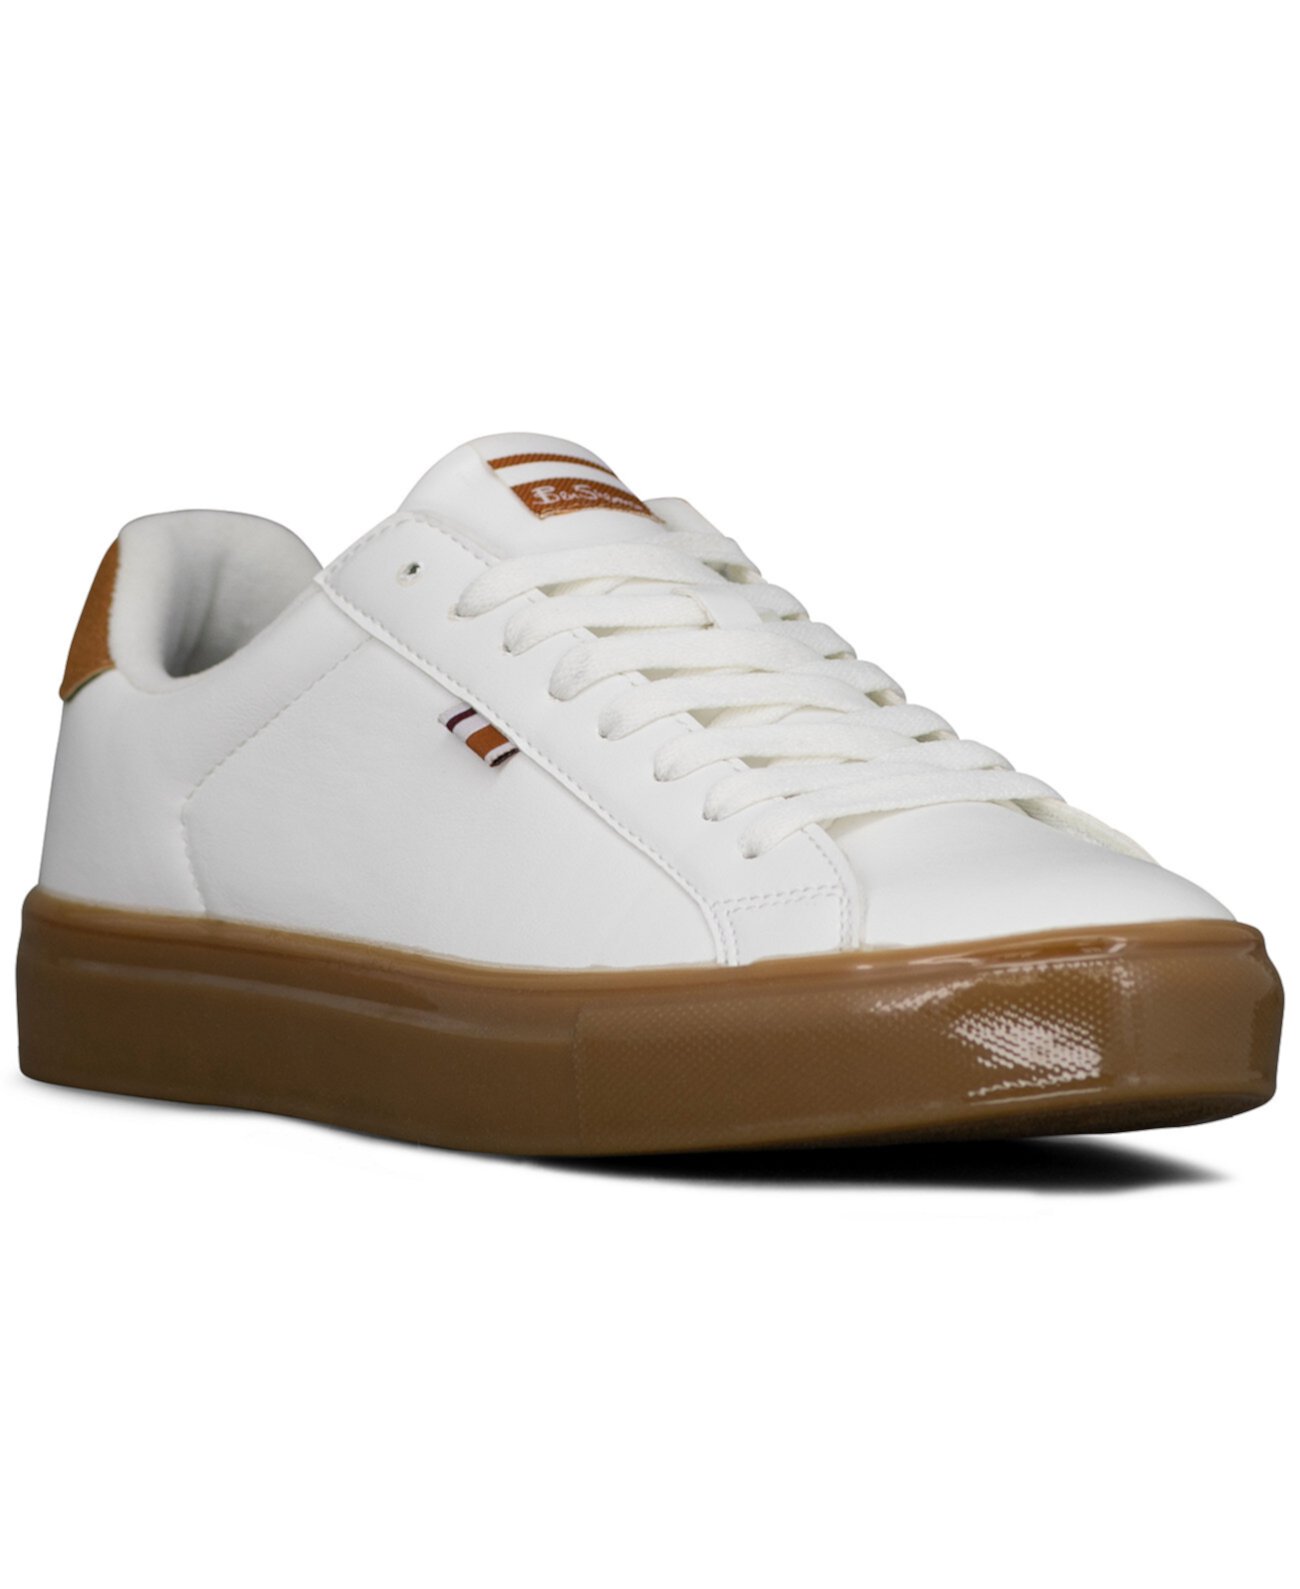 Men's Crowley Low Casual Sneakers from Finish Line Ben Sherman